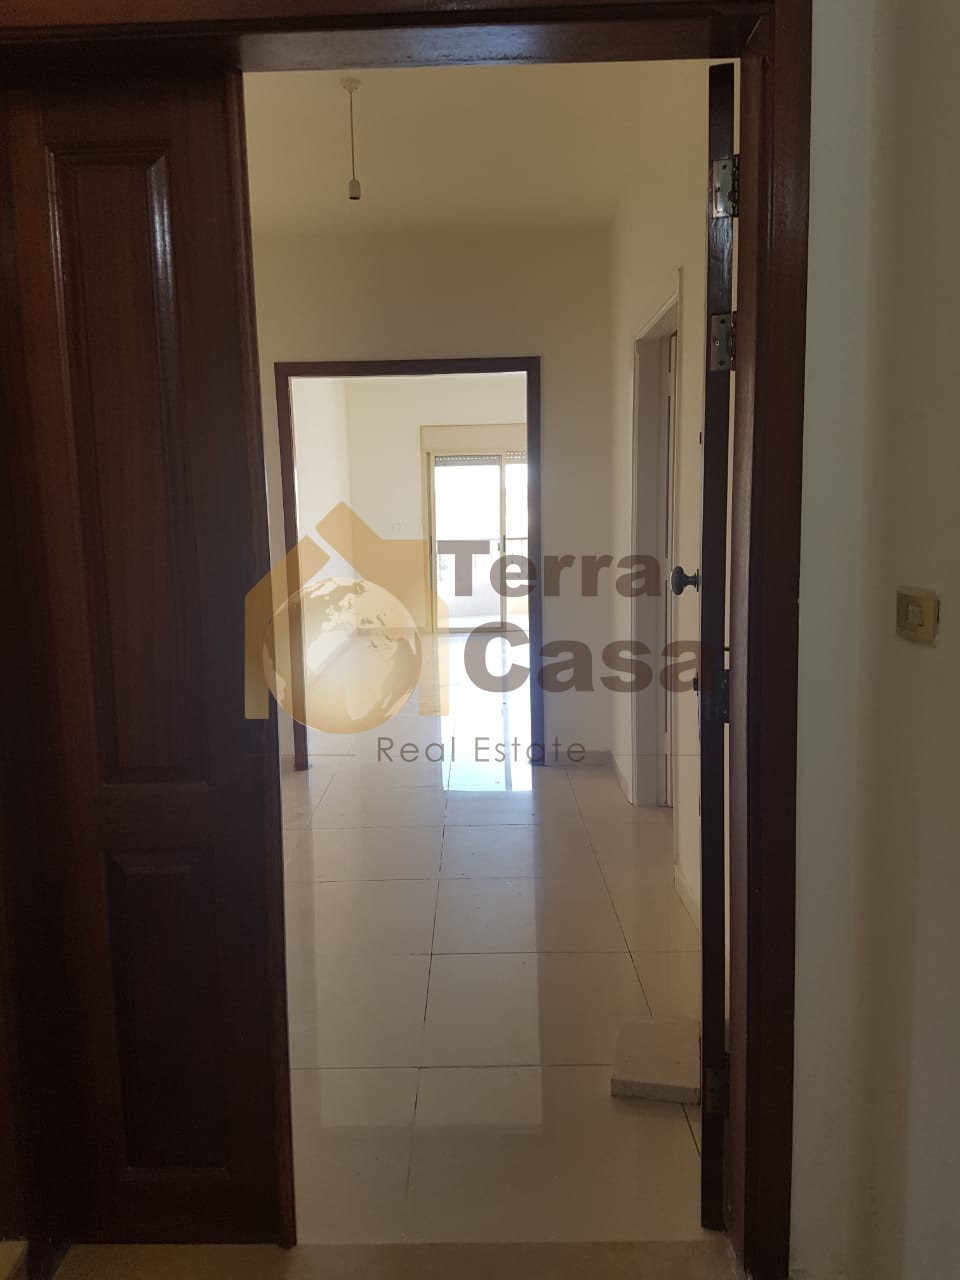 Apartment with open view nice location Ref# 1559